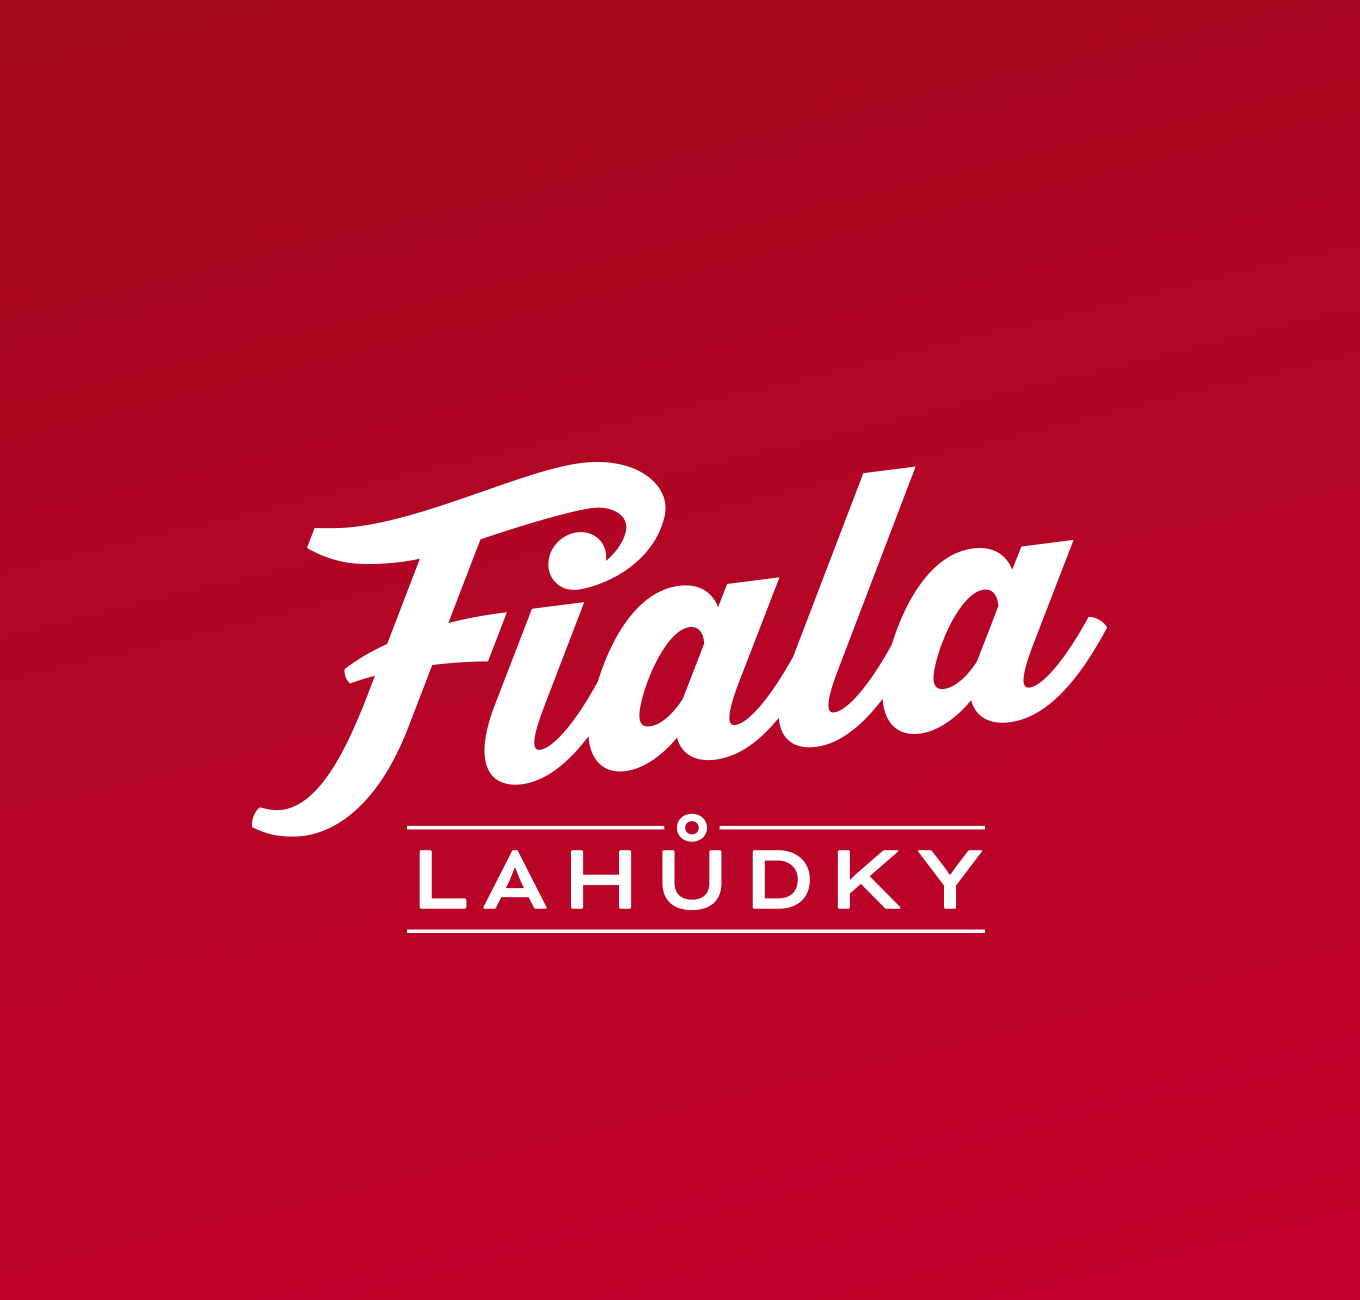 [album/Products_Model_Product/133/Lahudky_Fiala_logo_03.jpg]